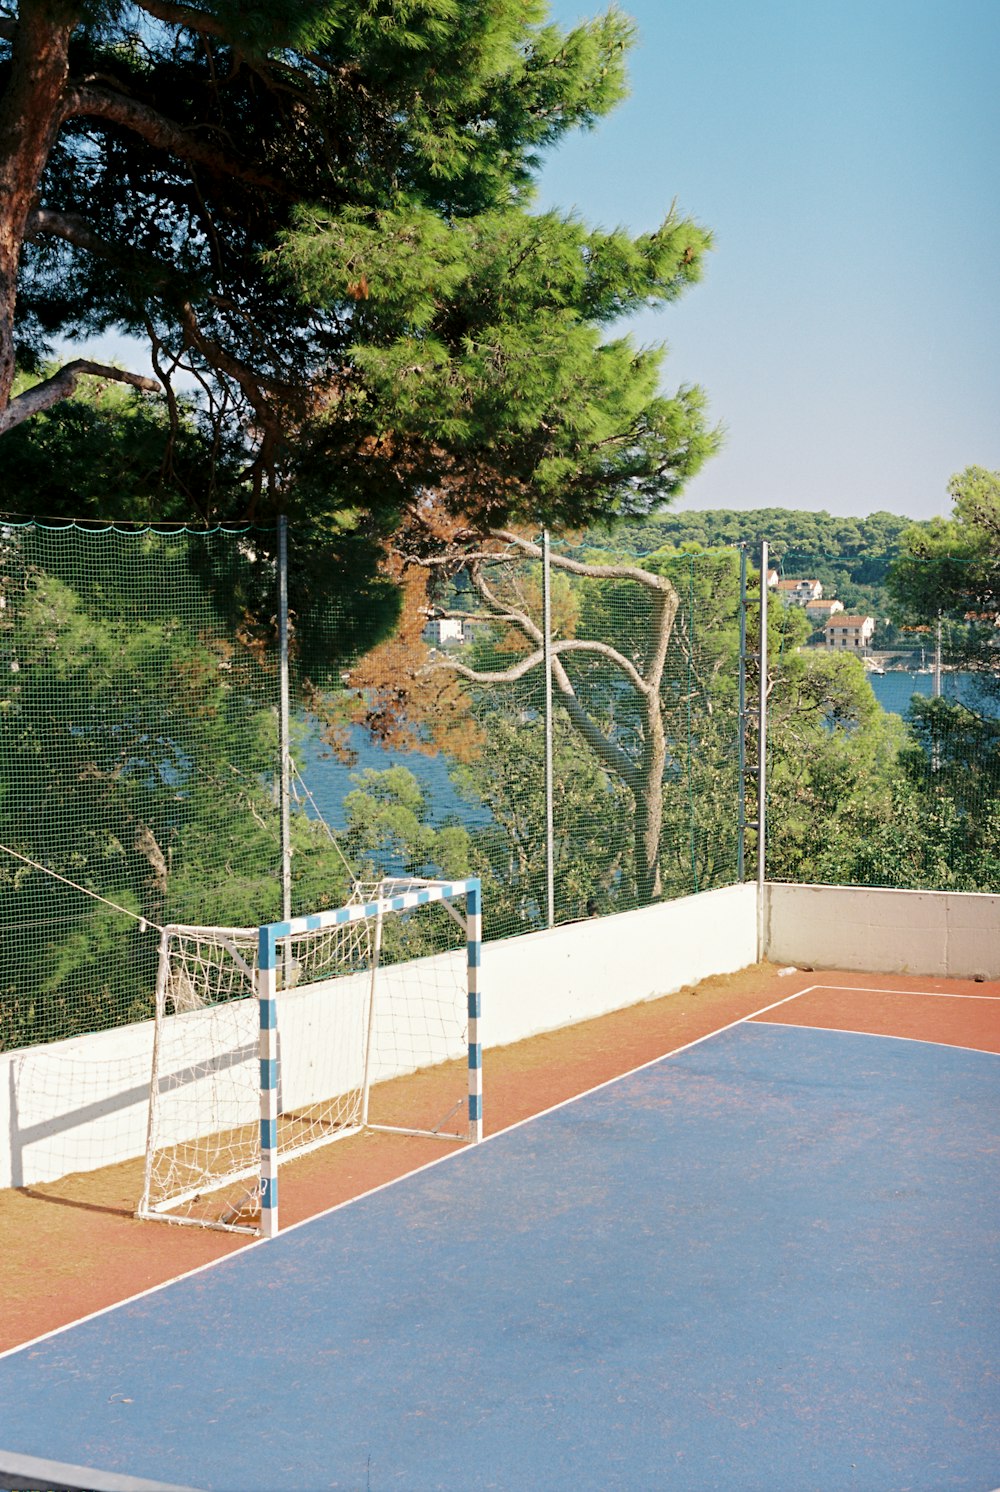 a tennis court with a net and a goal